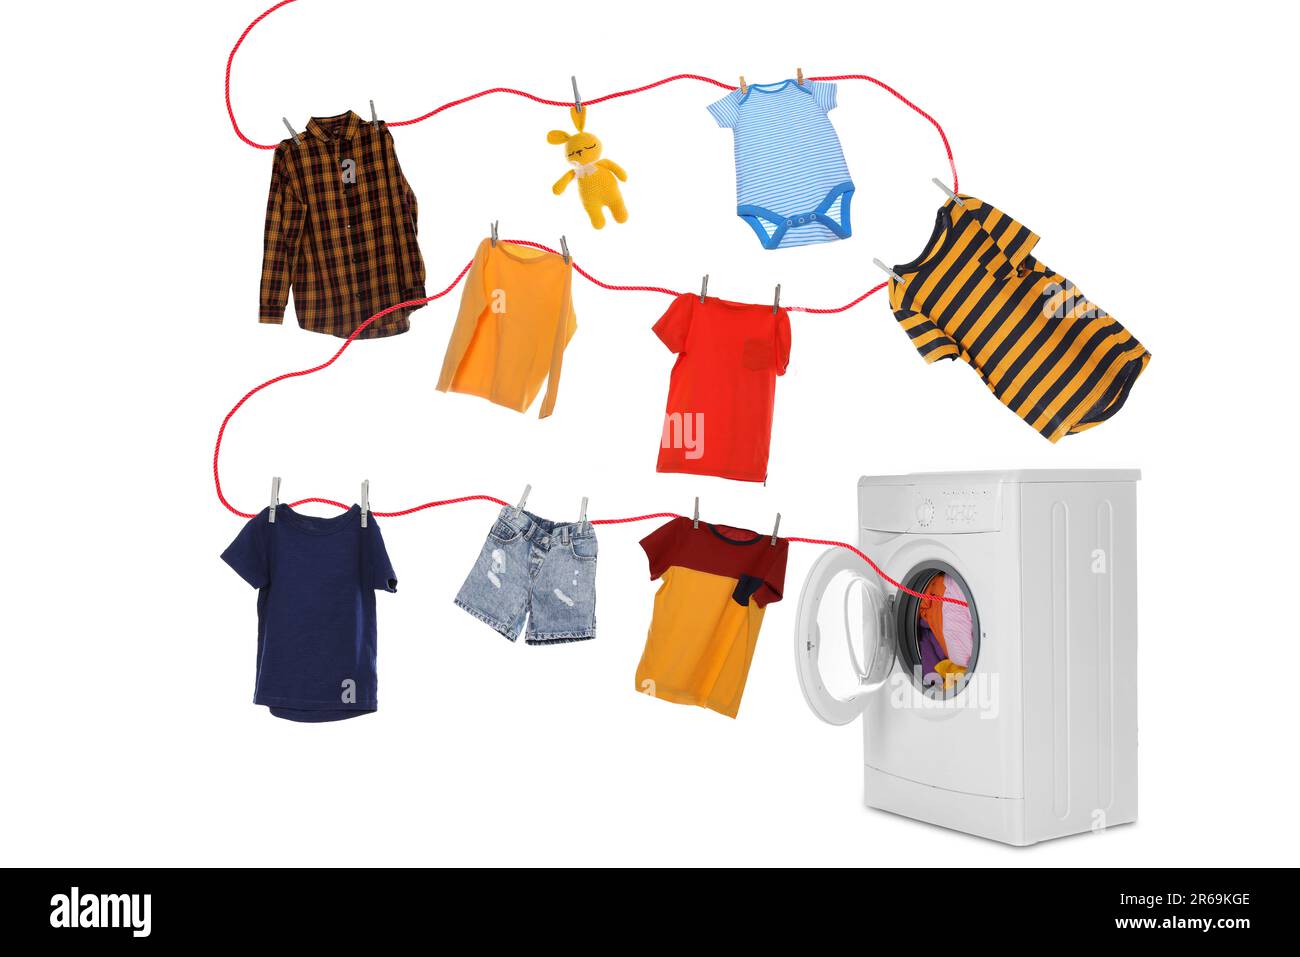 Drying laundry. Rope with children clothes flying out from washing machine on white background Stock Photo